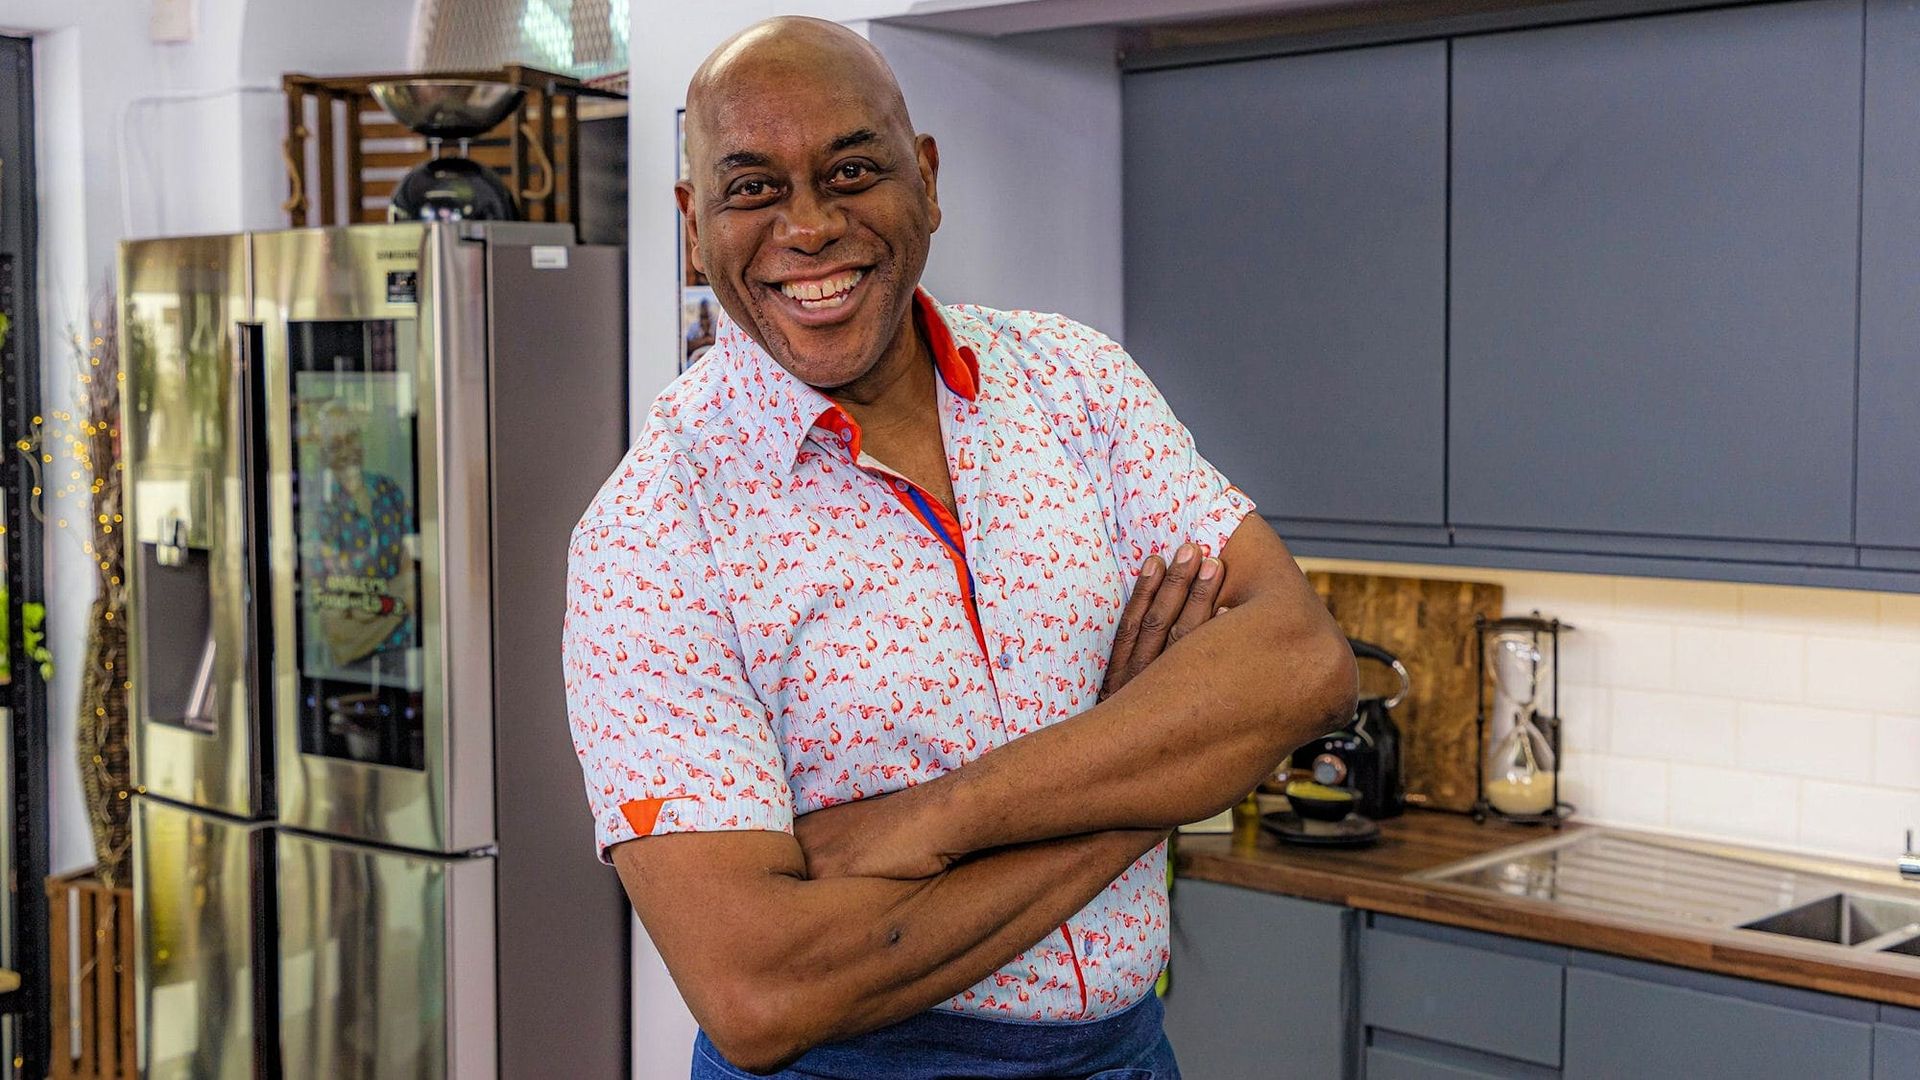 Ainsley's Food We Love background